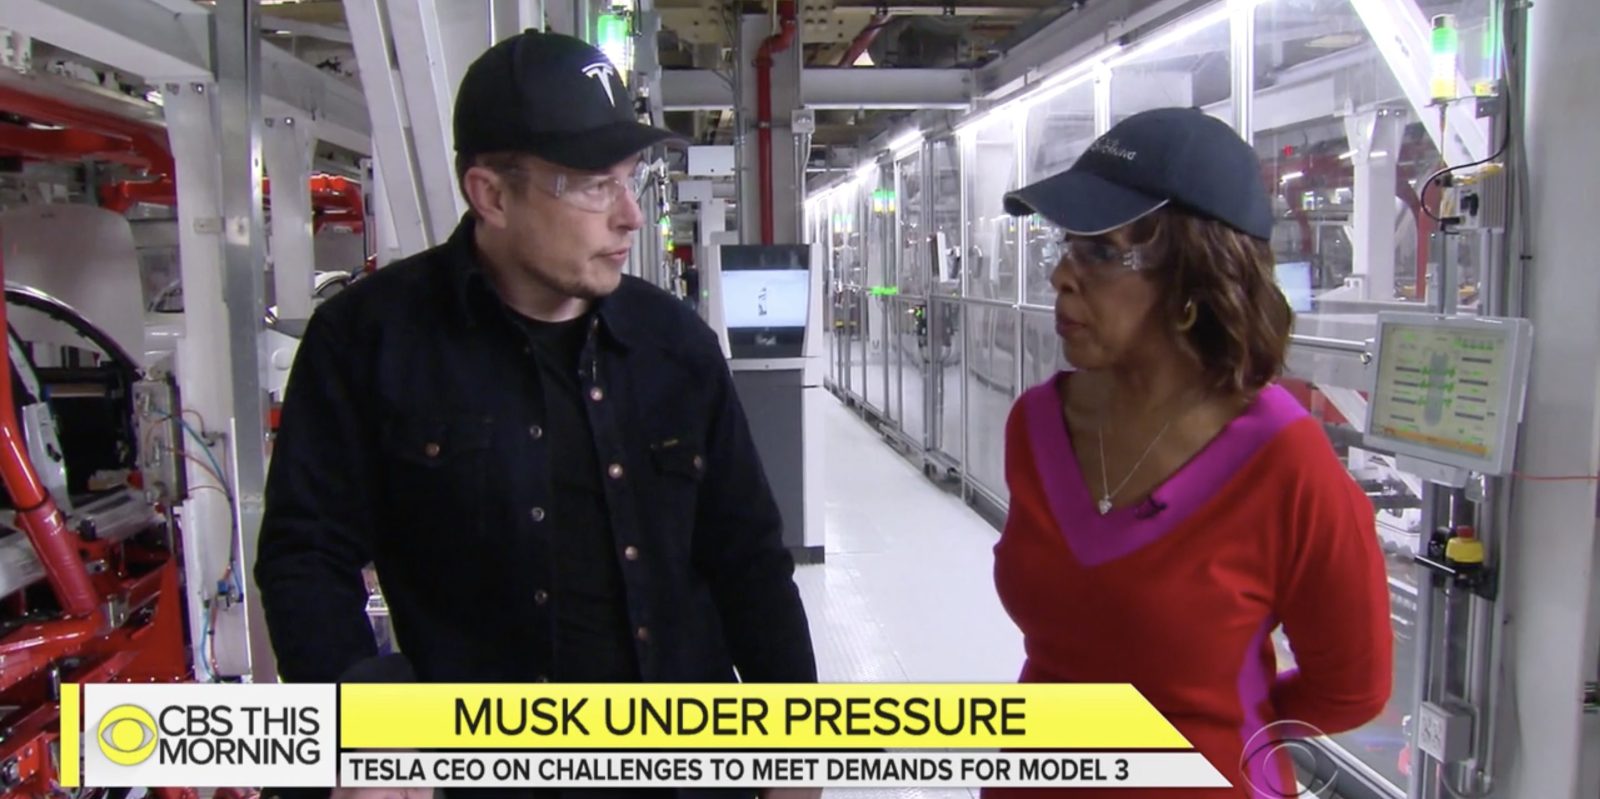 Elon Musk comments on Tesla Model 3 delays and 'production hell' - Electrek